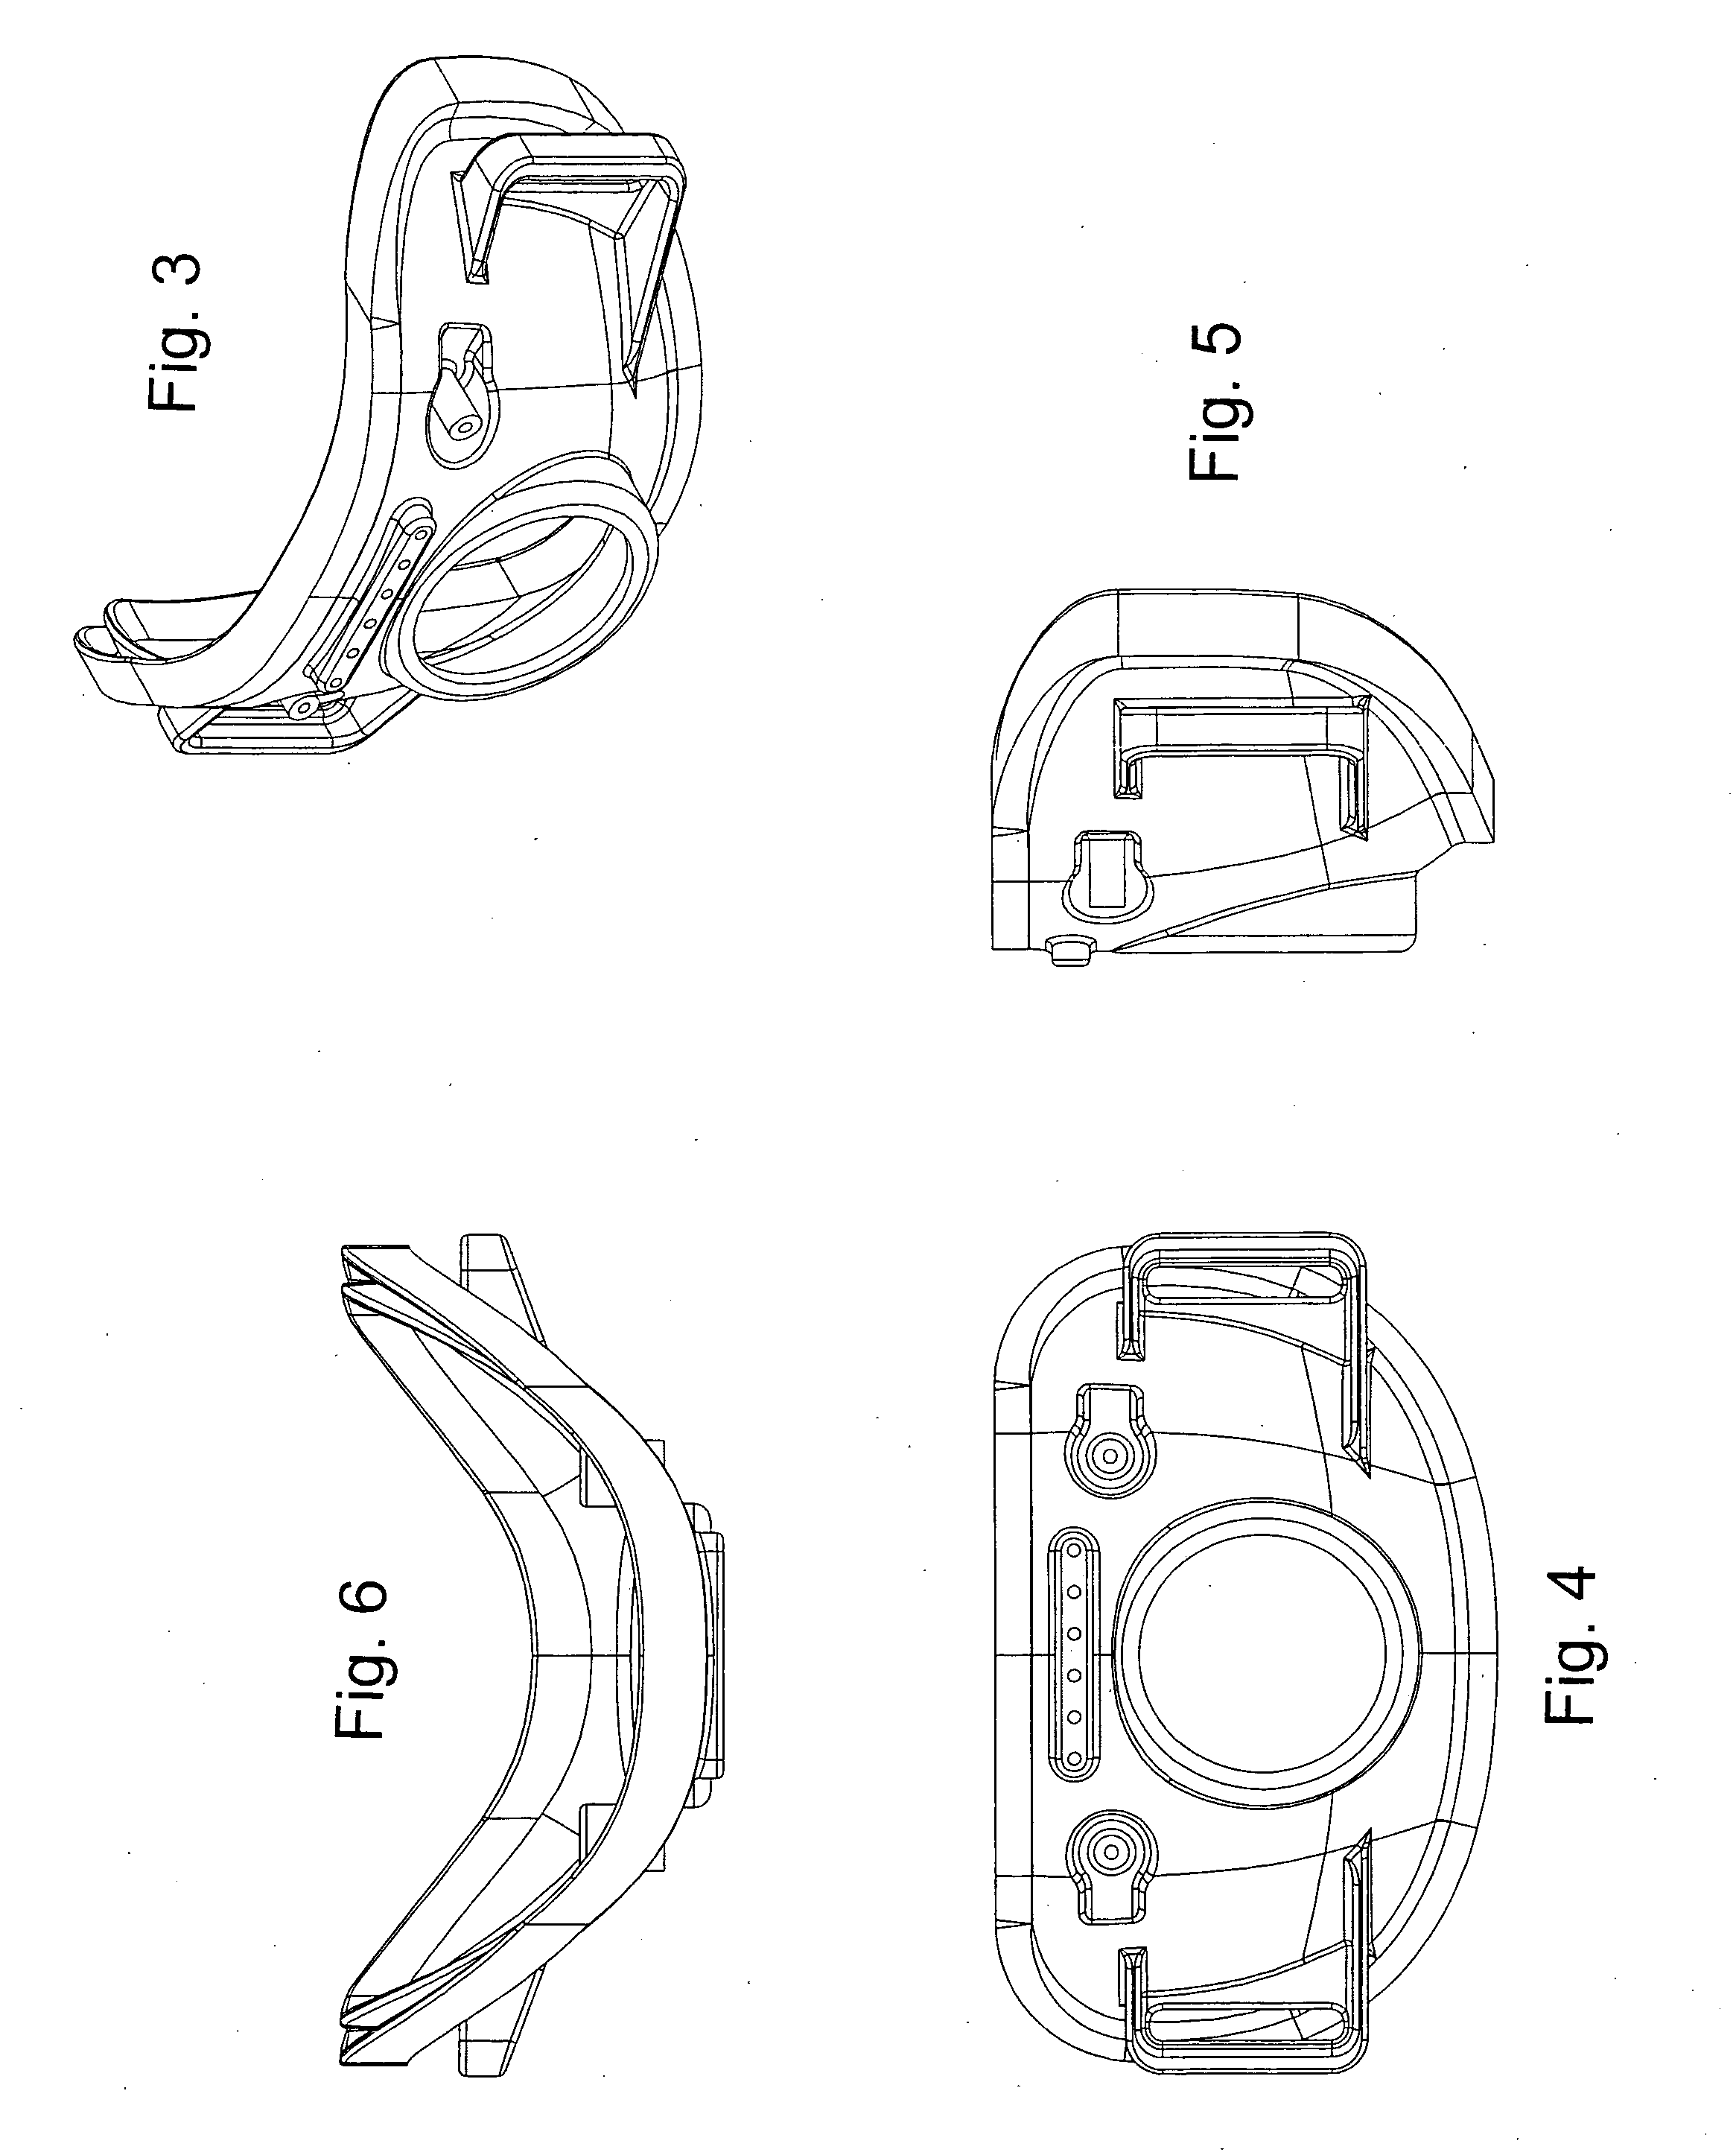 Hybrid ventilation mask with nasal interface and method for configuring such a mask